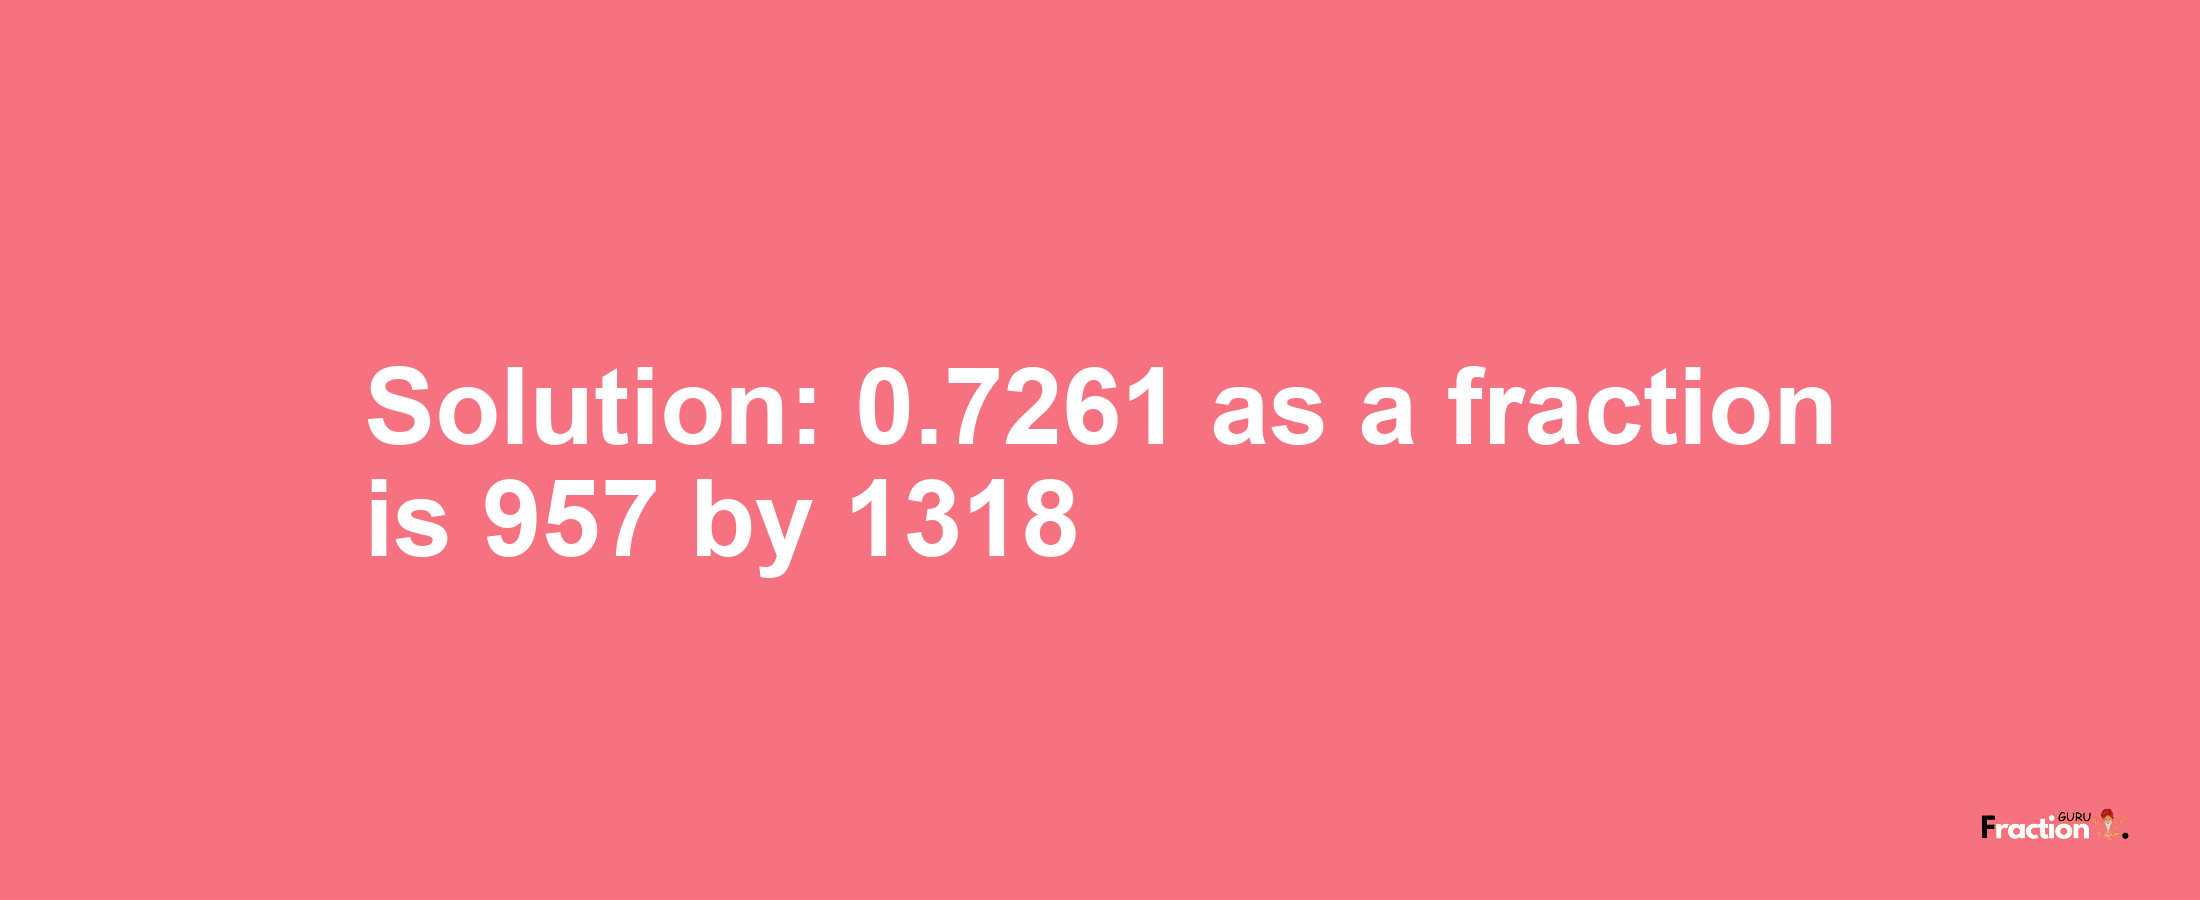 Solution:0.7261 as a fraction is 957/1318